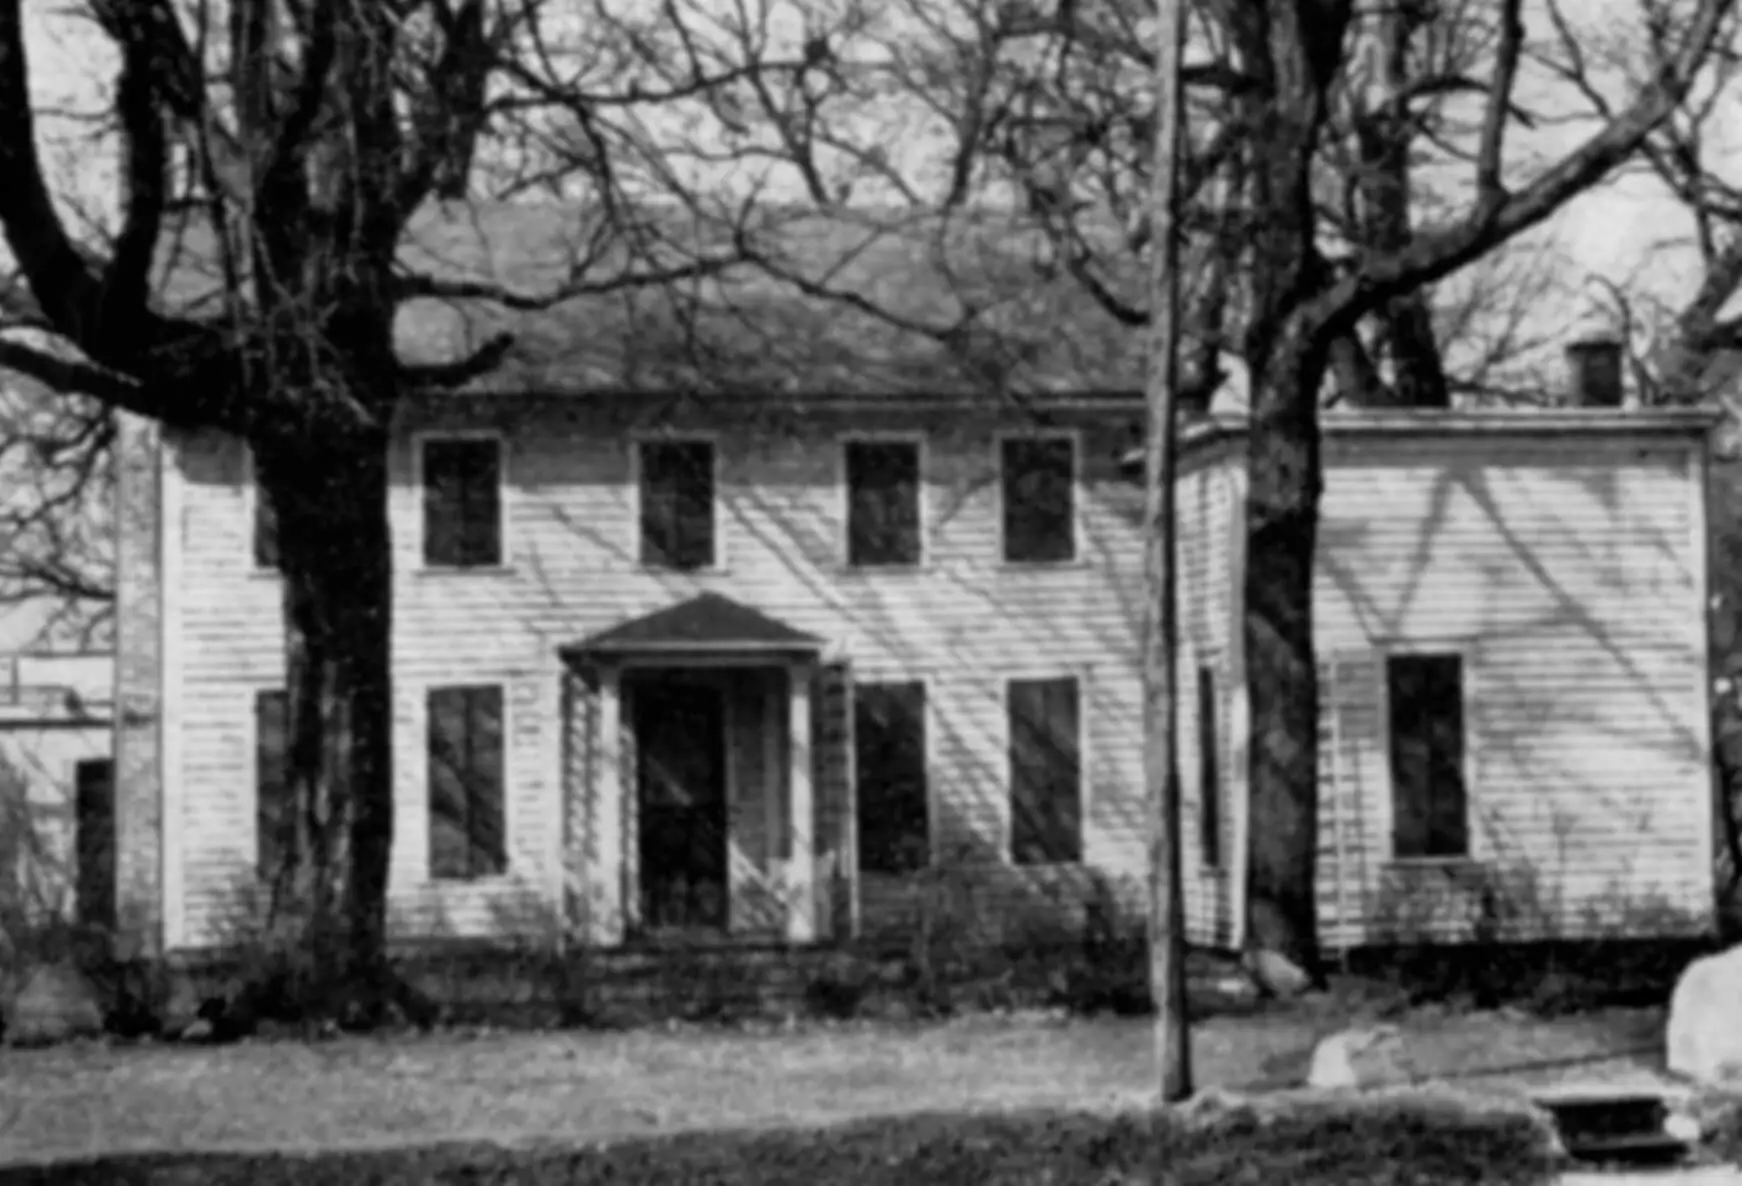 A black and white photograph of a two-story wooden frame house with two trees in the yard.